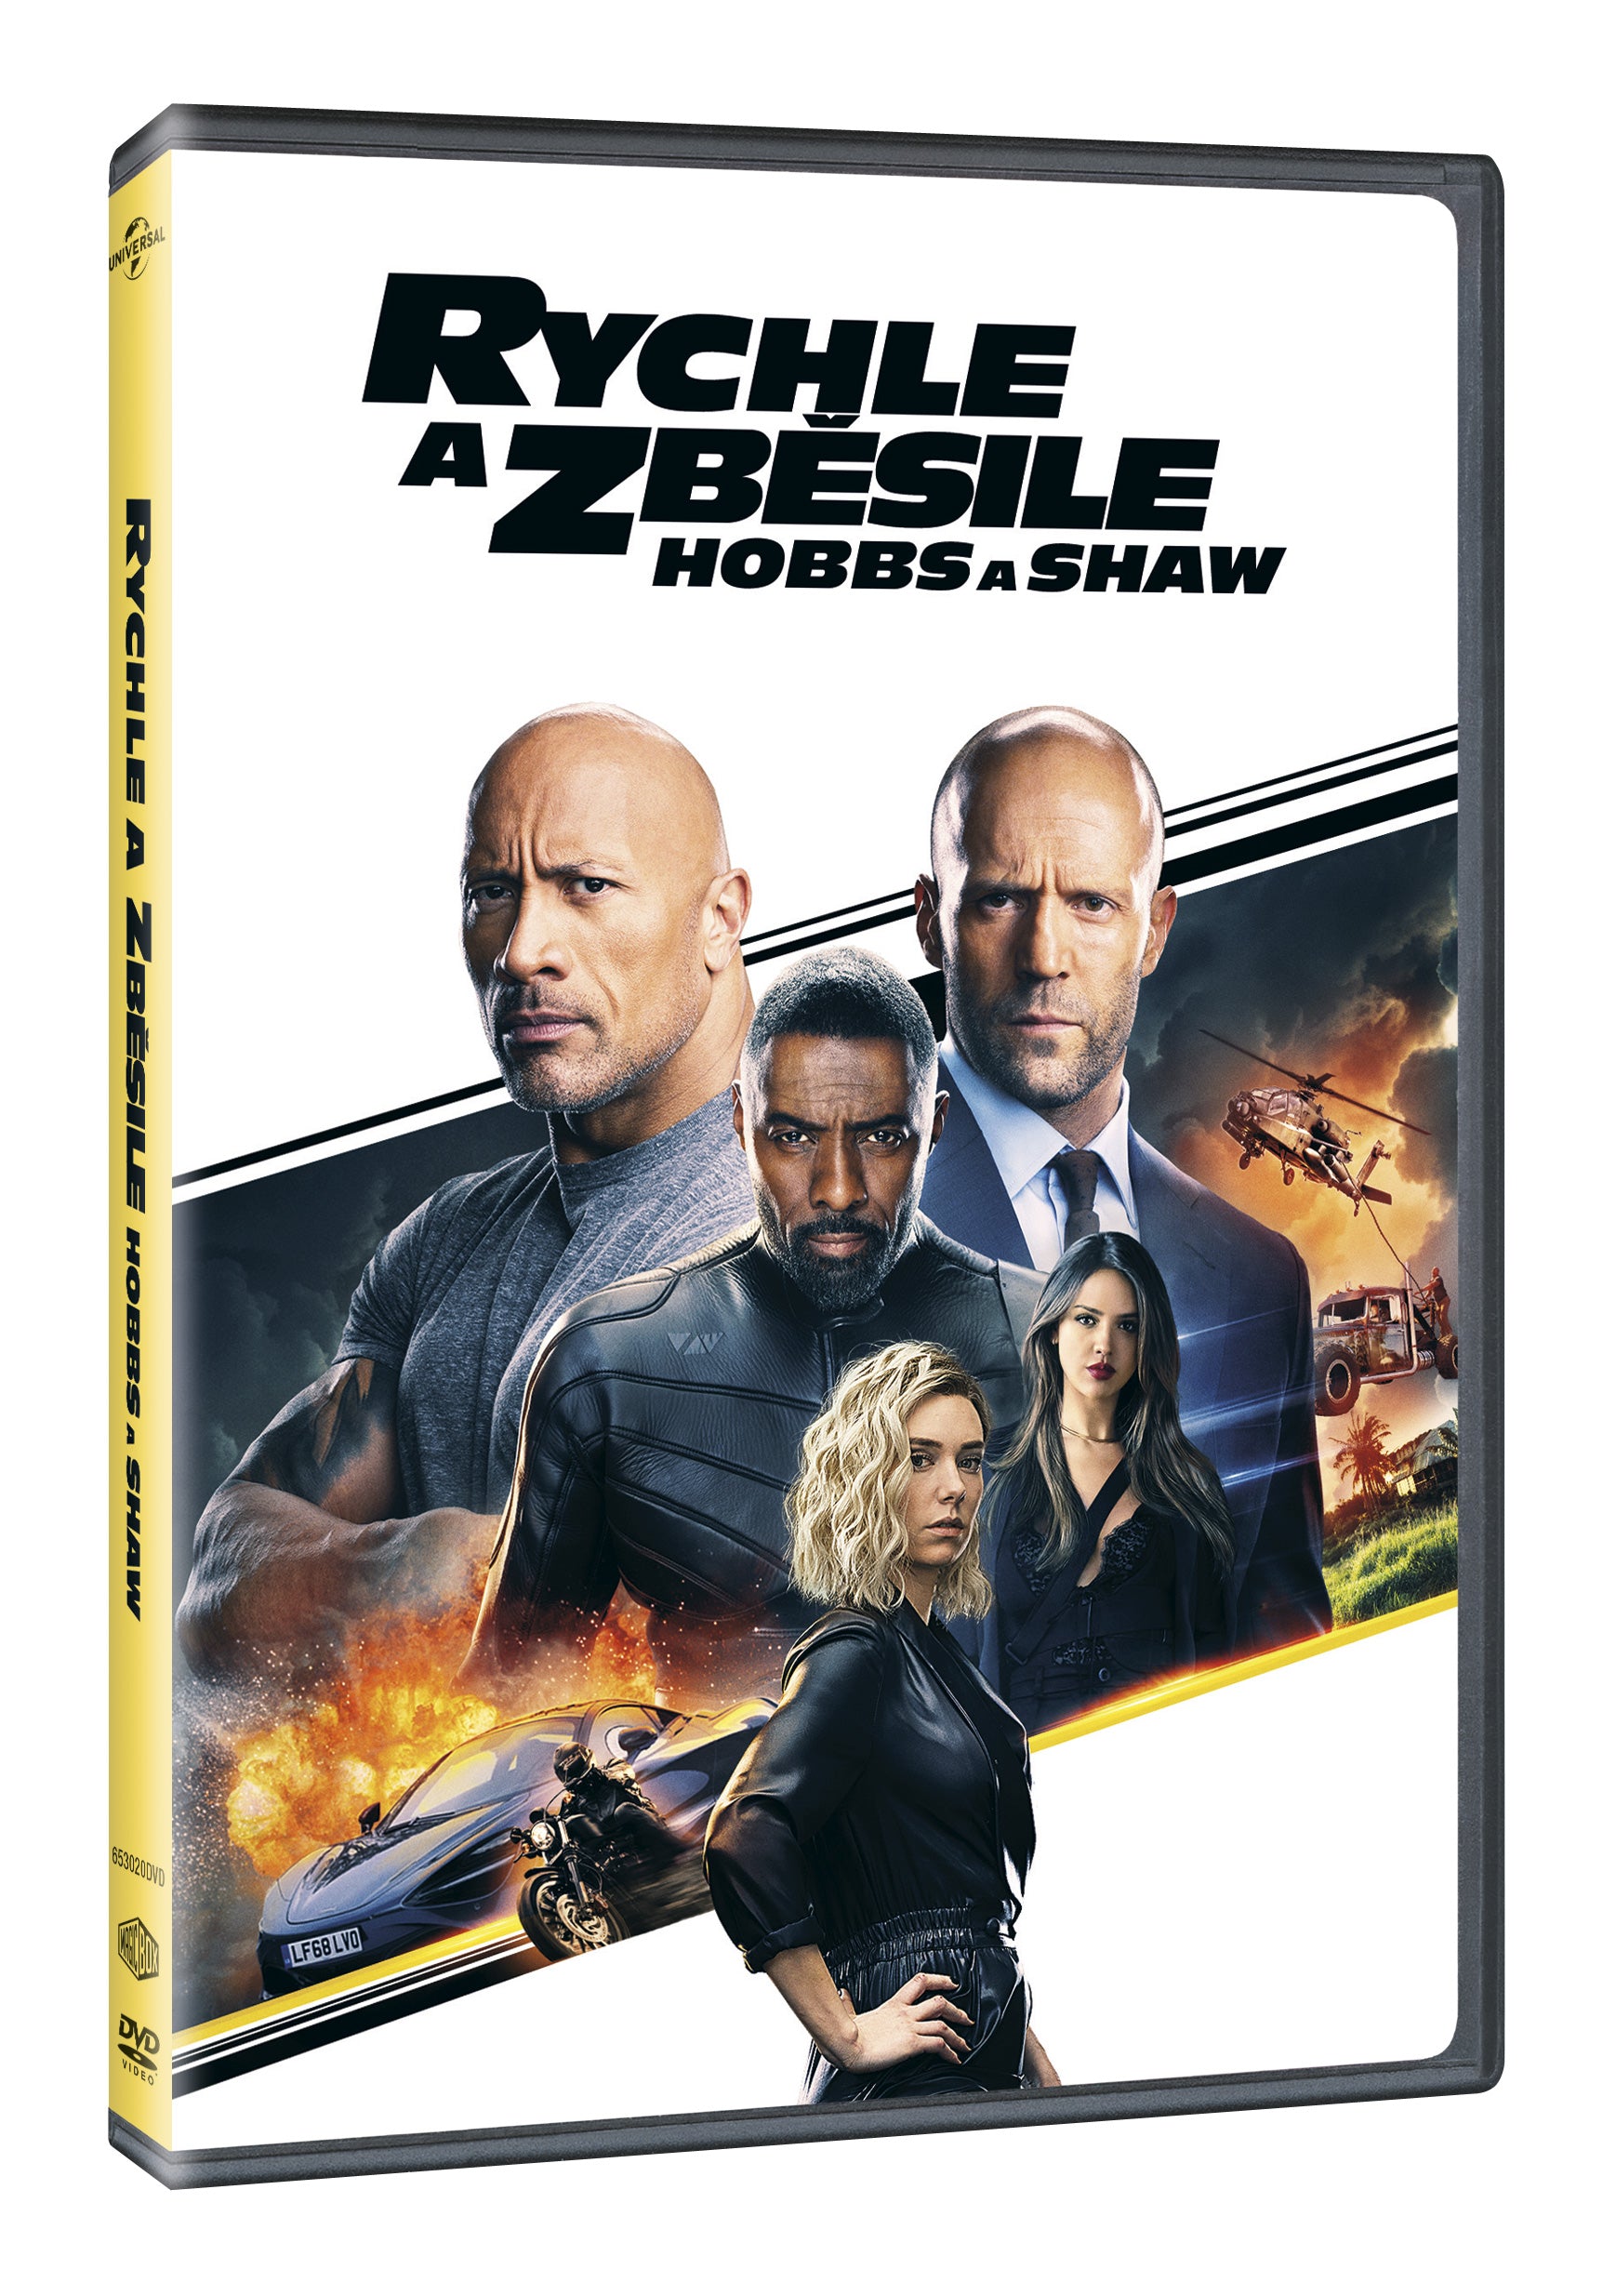 Rychle a zbesile: Hobbs a Shaw DVD / Fast & Furious Presents: Hobbs & Shaw